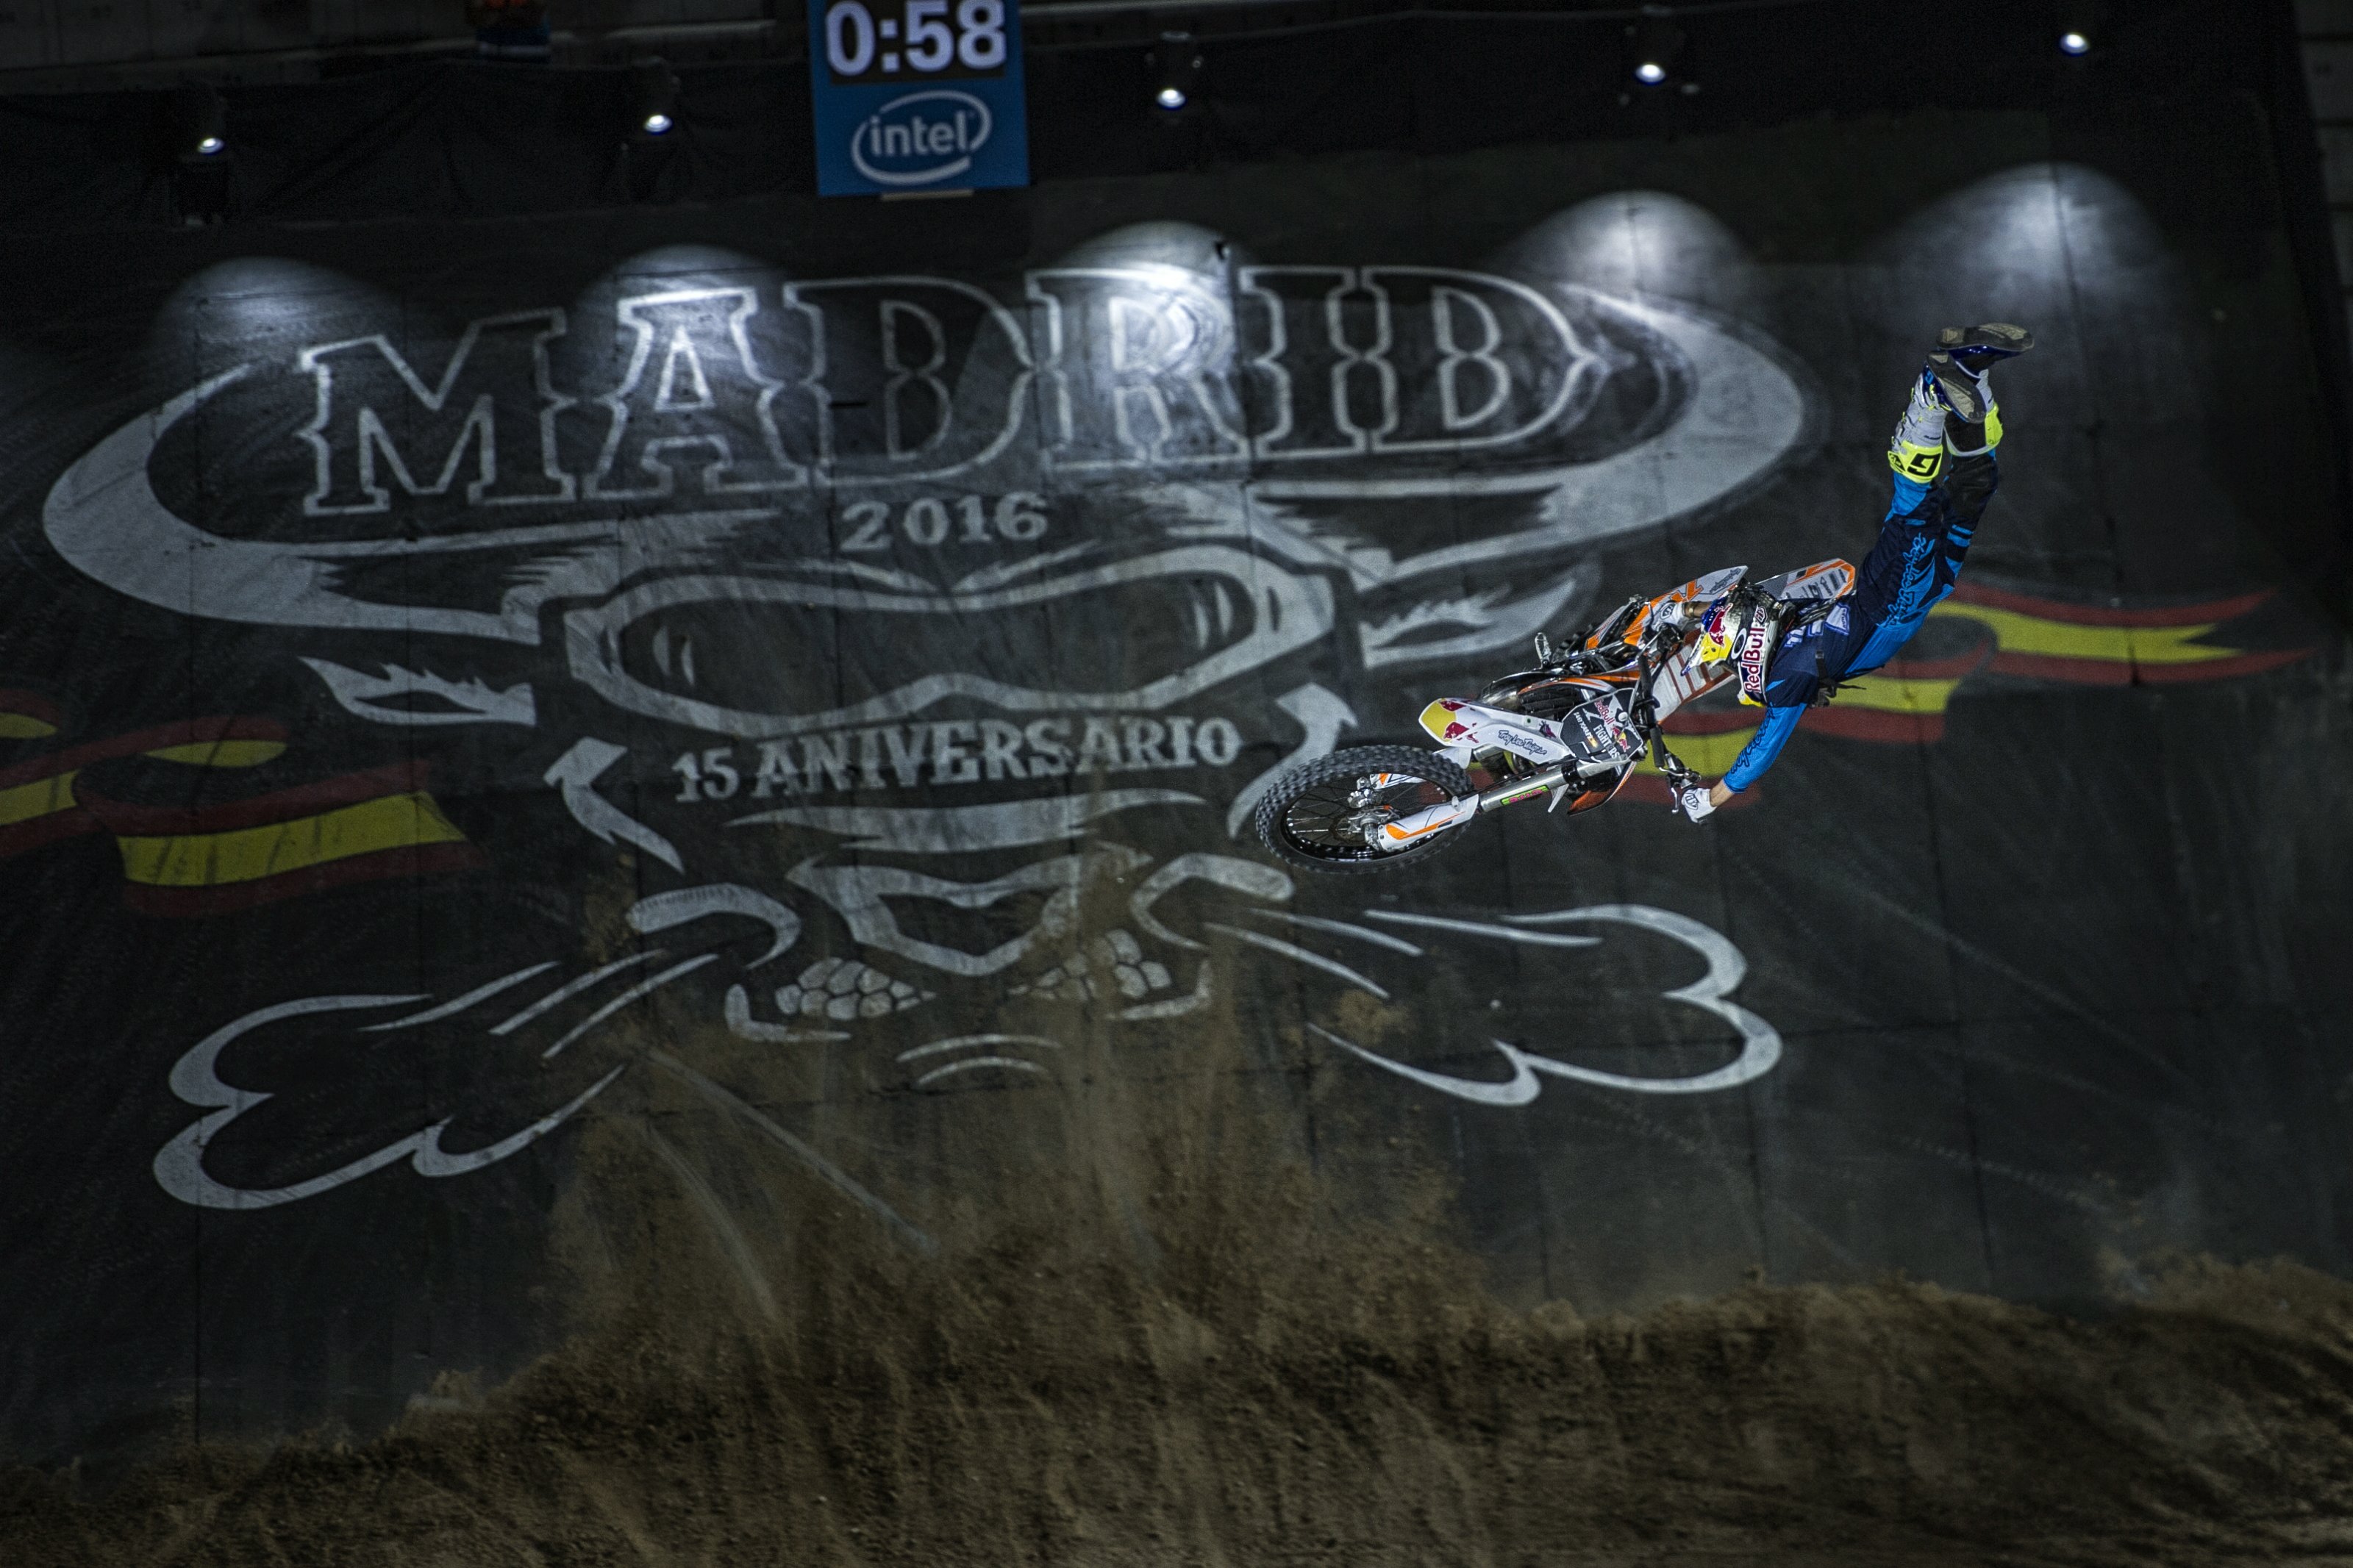 Dany Torres of Spain performs during the qualifying of the Red Bull X-Fighters at the Plaza de Toros de Las Ventas in Madrid, Spain on June 23, 2016.